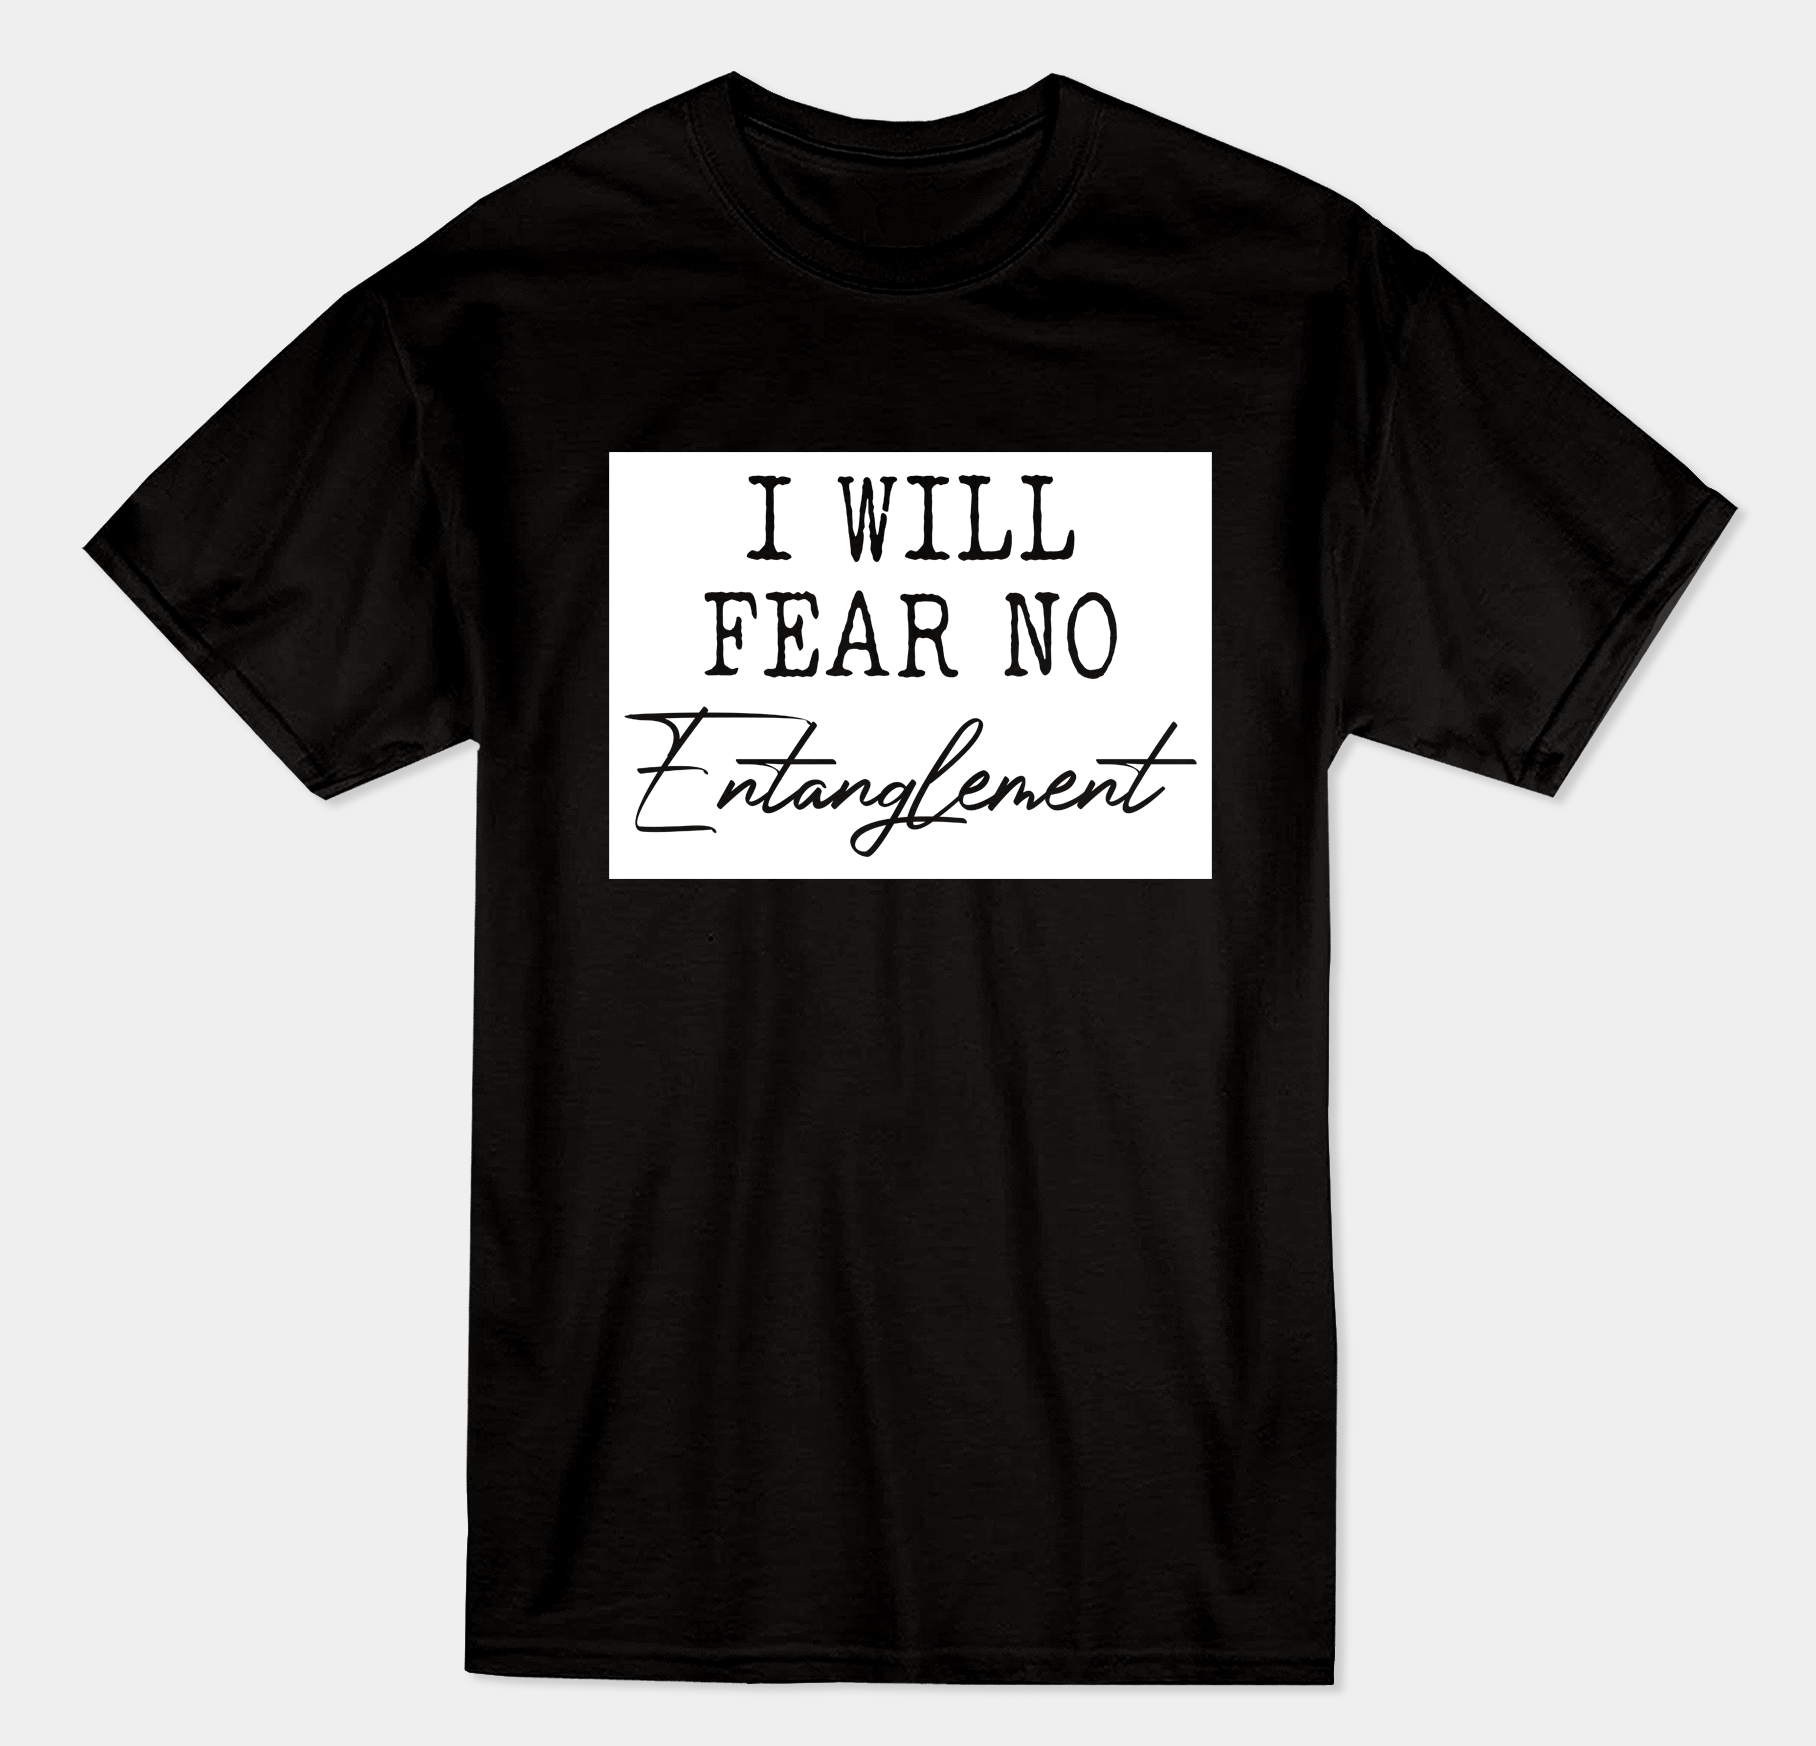 I Will FEAR No ENTANGLEMENT!